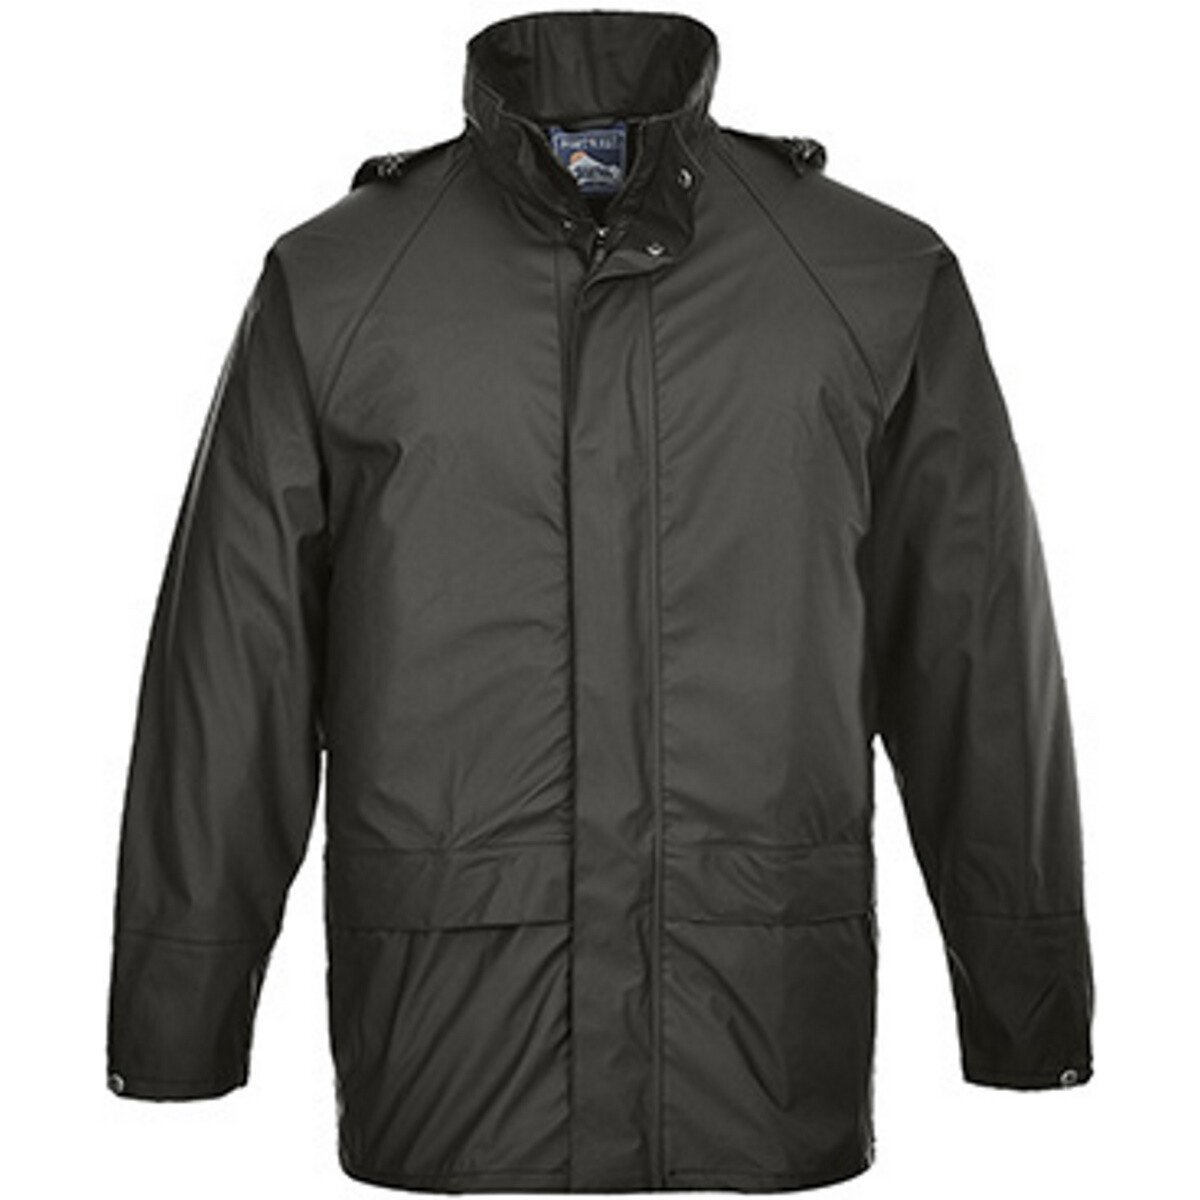 Portwest S450 Sealtex Classic Waterproof Jacket - 3 Colour Choice from ...